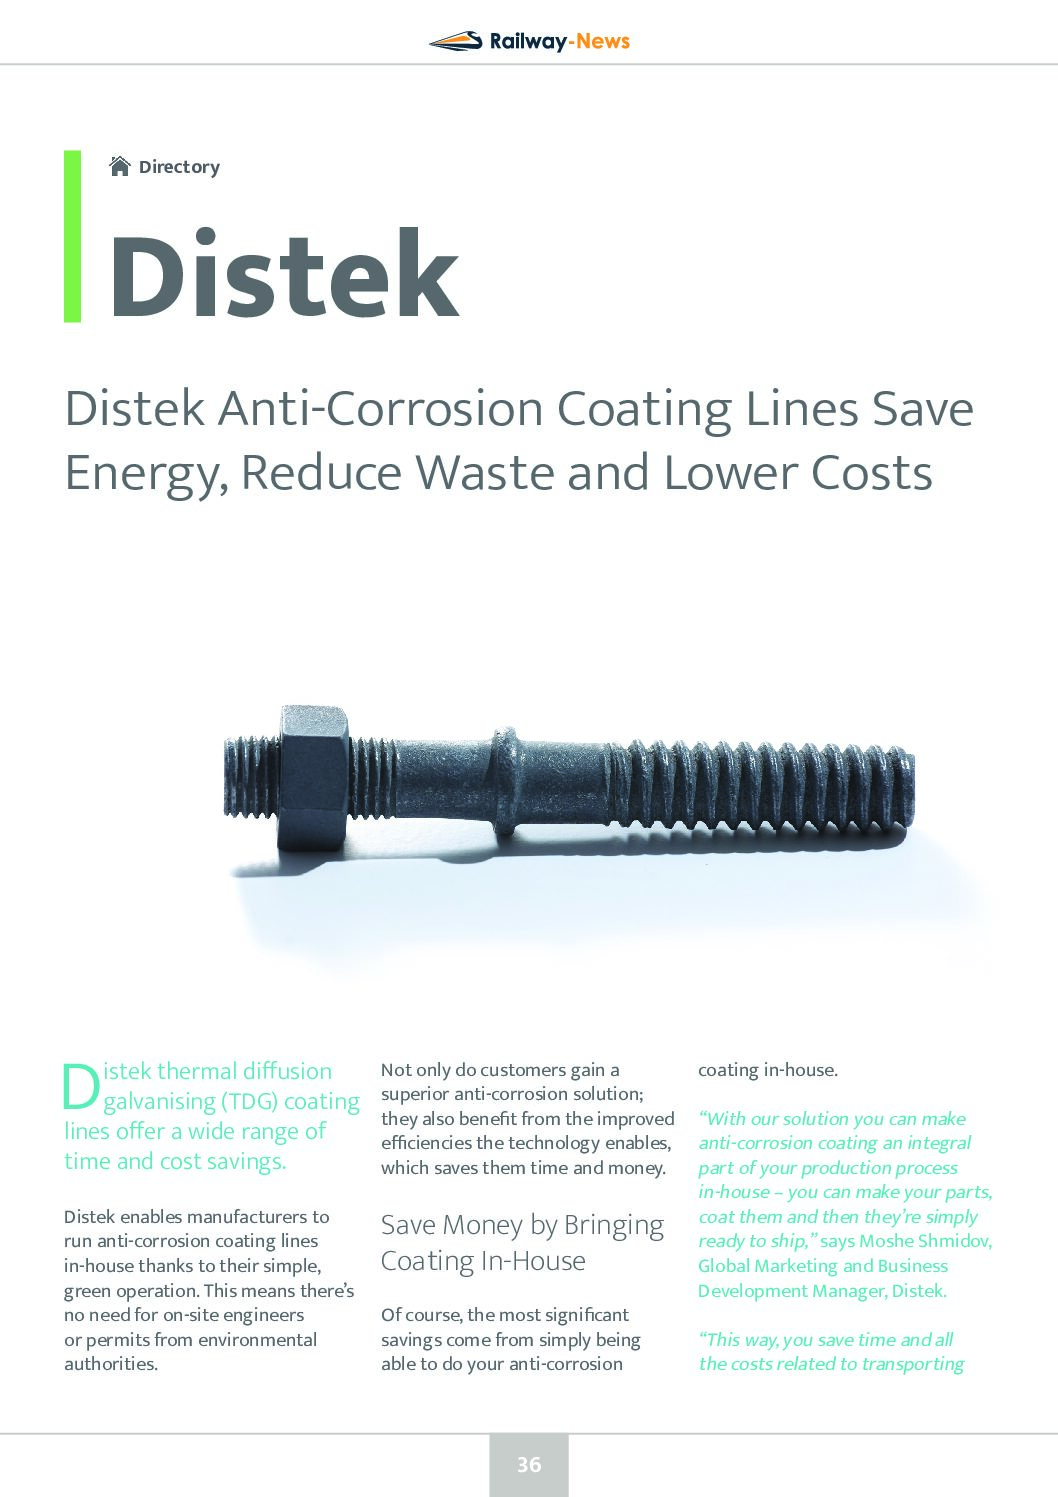 Distek Anti-Corrosion Coating Lines Save Energy and Lower Costs